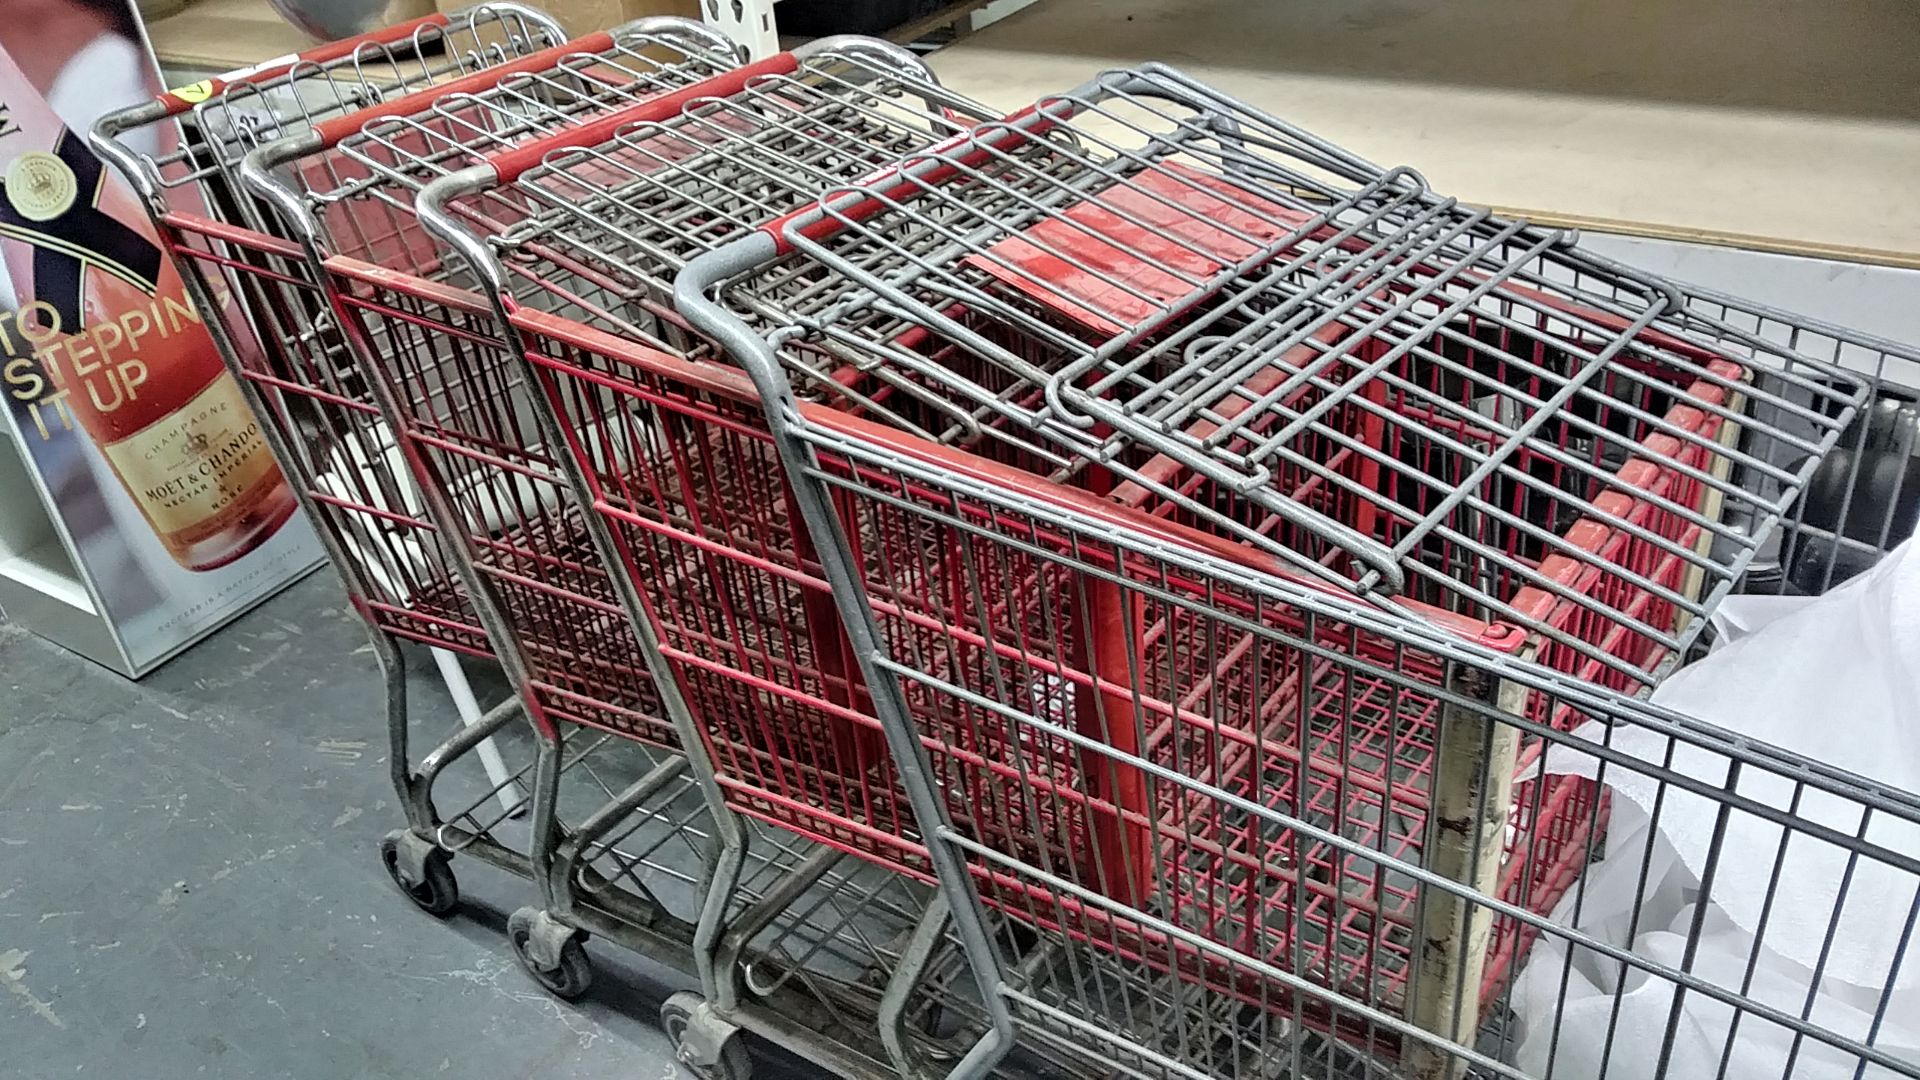 SHOPPING CARTS (INCLUDES QTY 4)